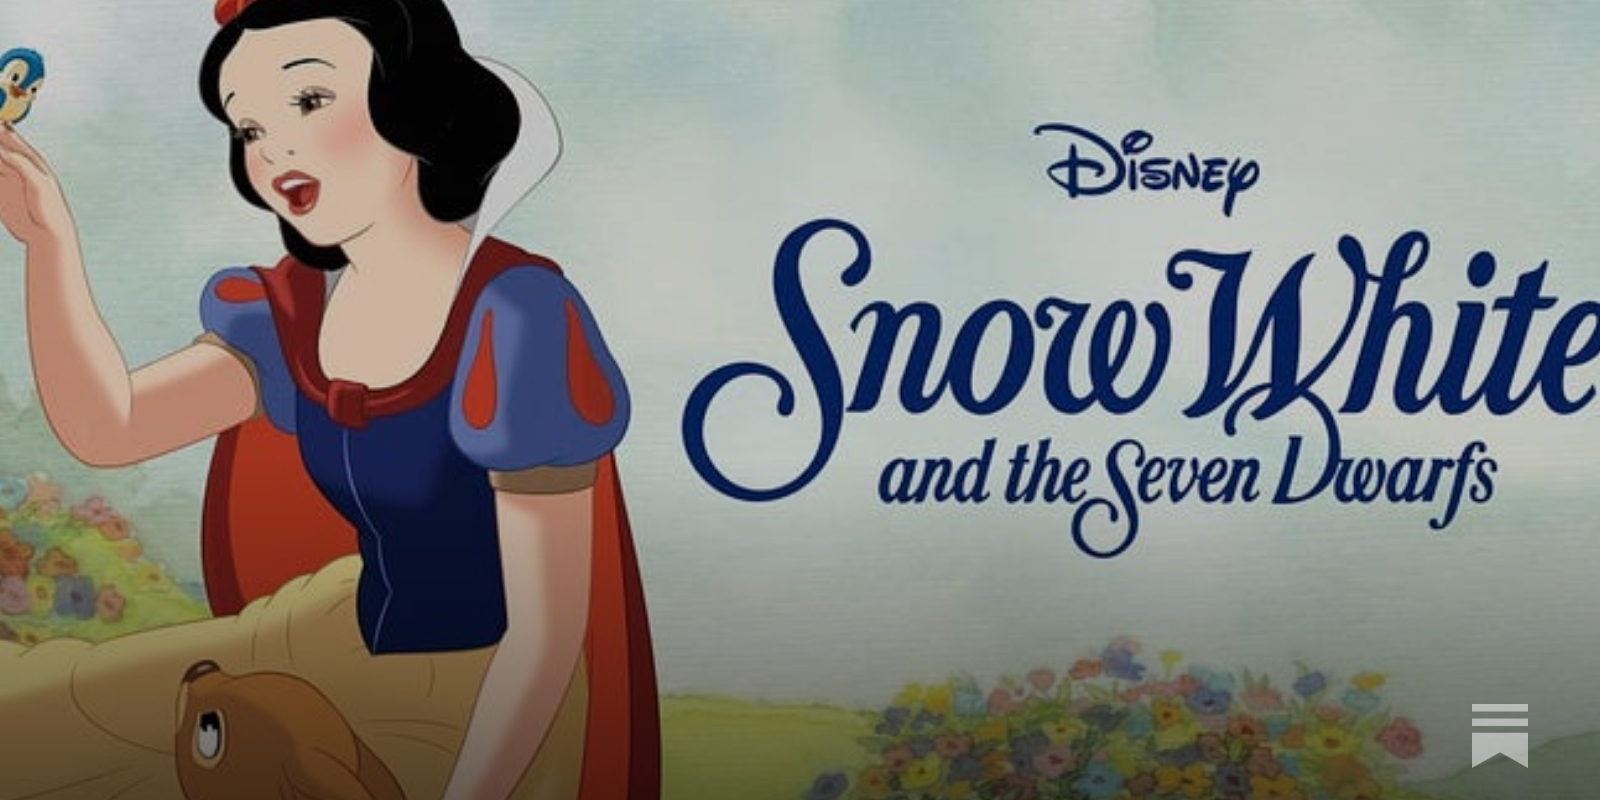 Snow White and the Seven Dwarfs (1937) 4K Ultra HD Review :  r/HD_MOVIE_SOURCE